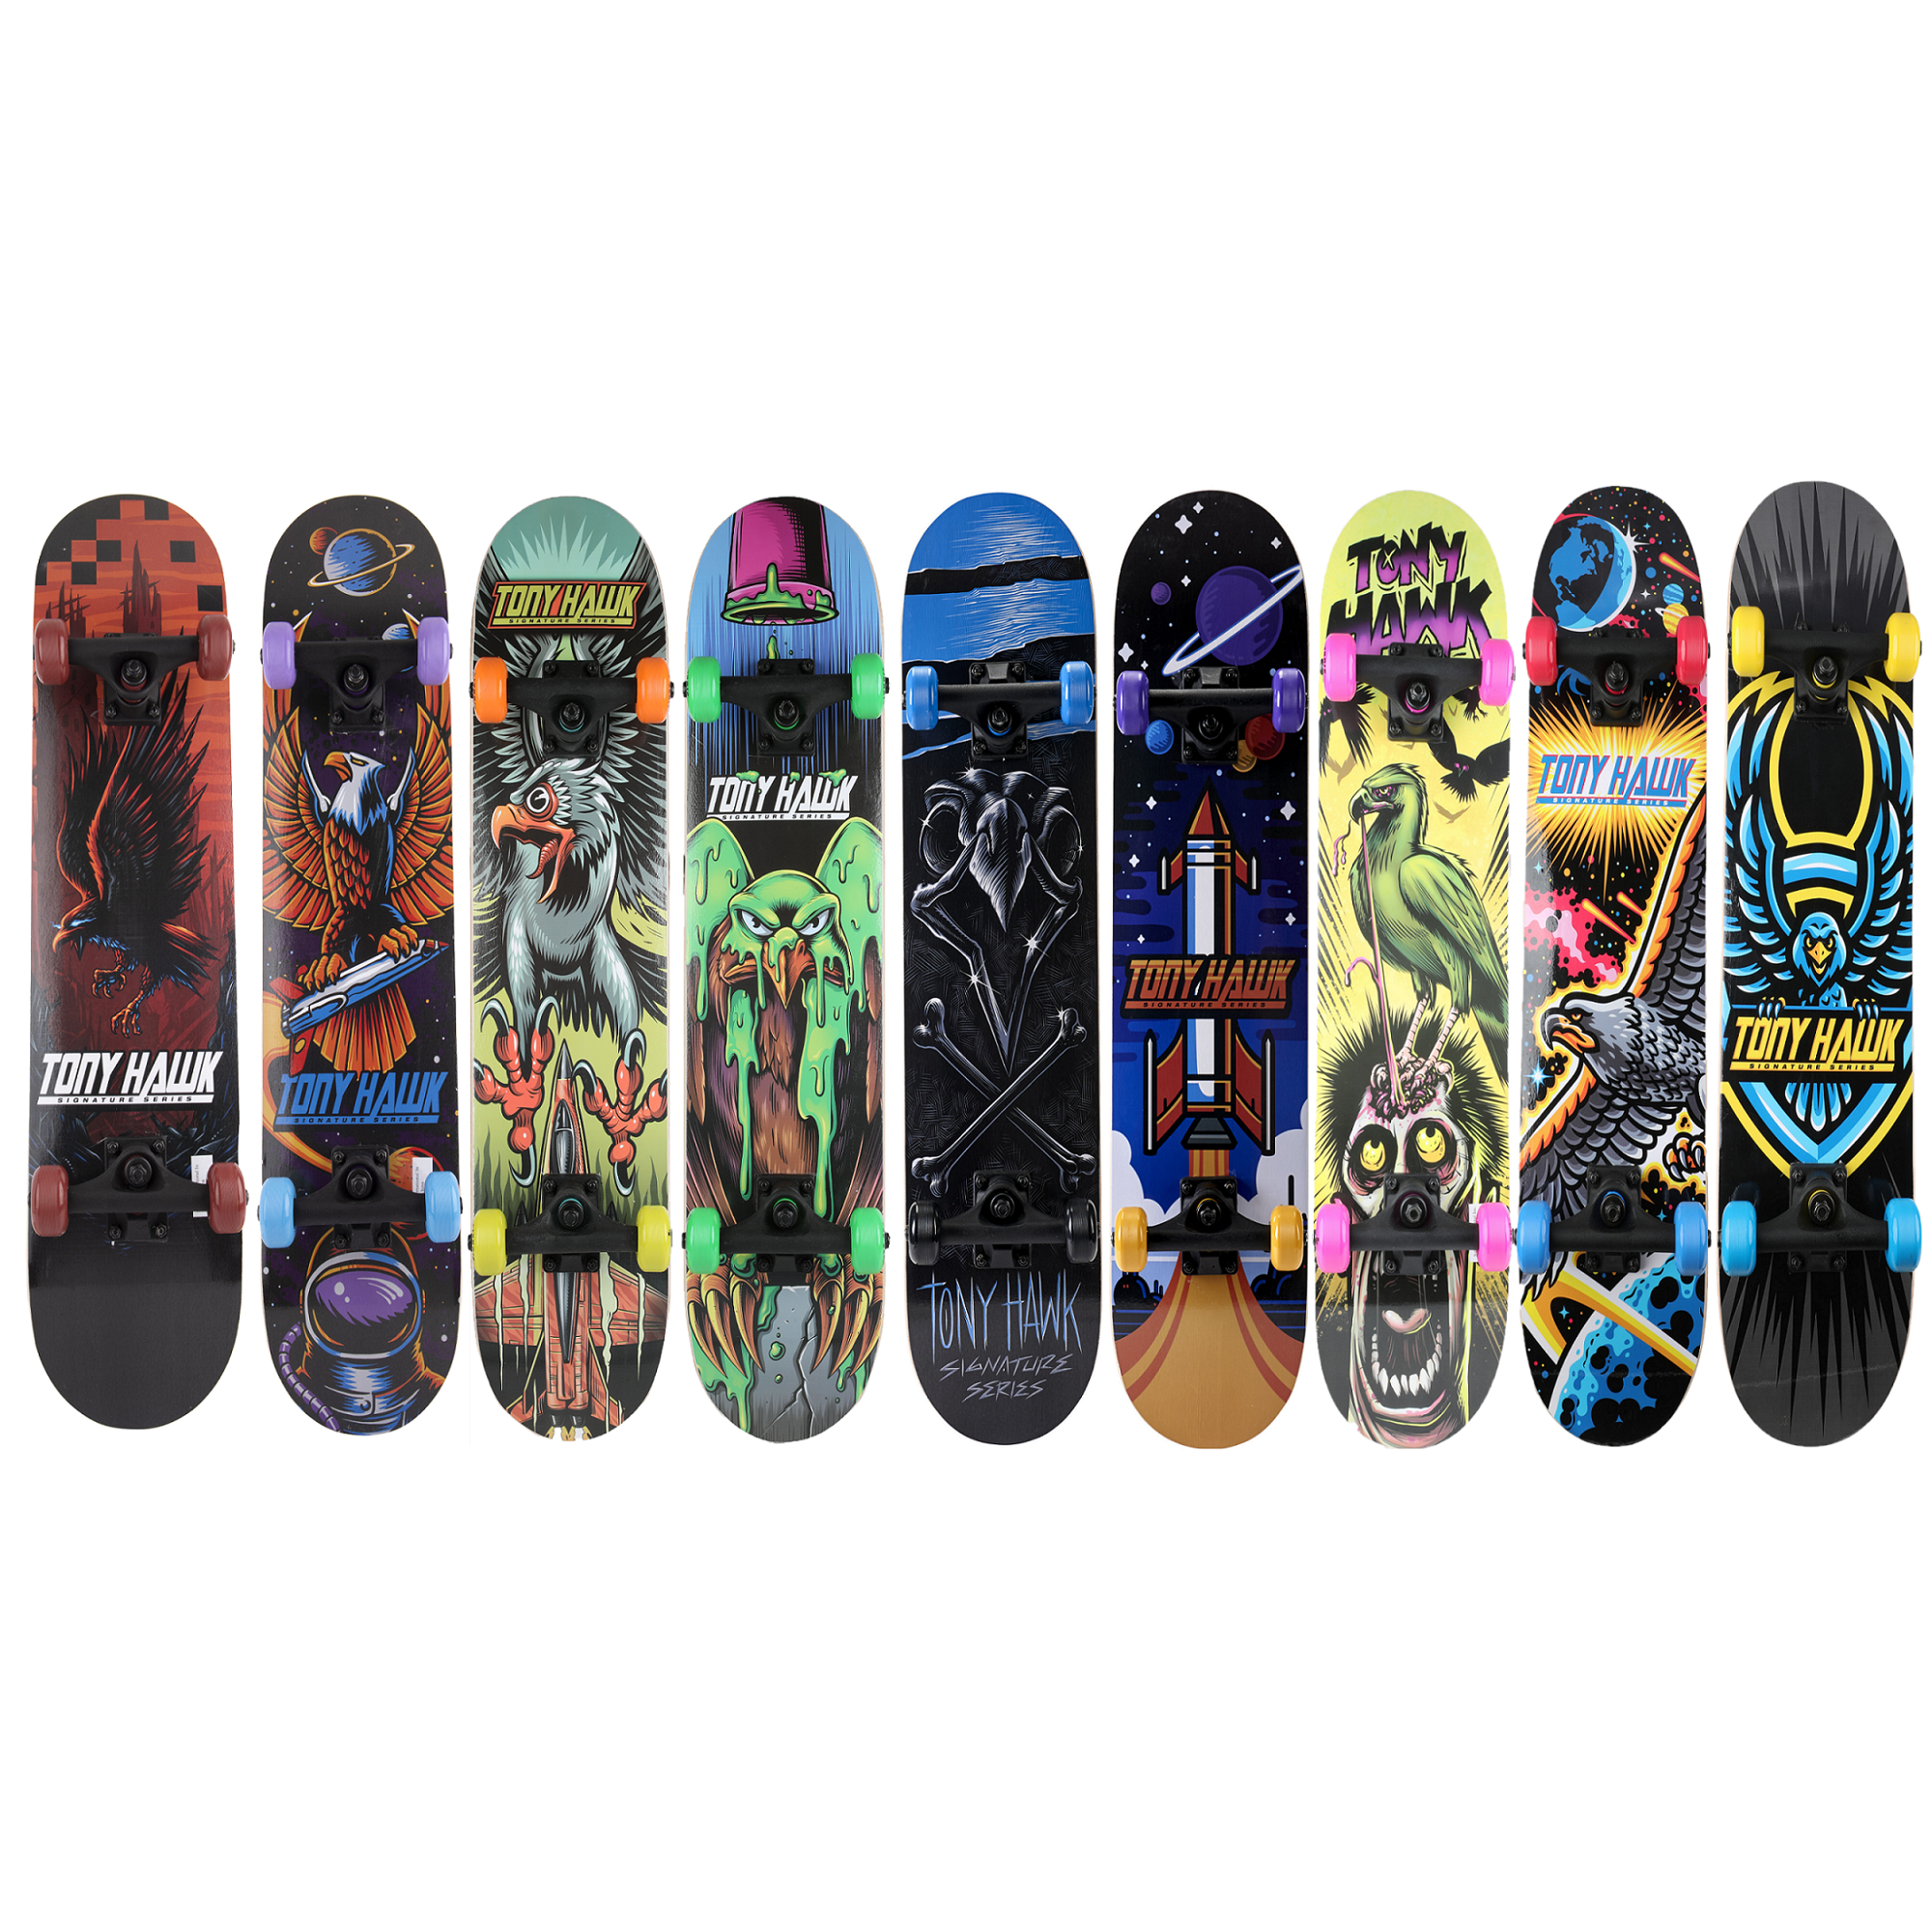 Gezond eten ironie Onschuldig Tony Hawk 31" Popsicle Skateboard with Pro Trucks- Multicolor, Ages 5+,  Full Black Grip Tape, Glossy Wood Finish, 50mmx30mm Colored Wheels with  Traction Grooves, ABEC 3 Bearings, "Styles May Vary" - Walmart.com